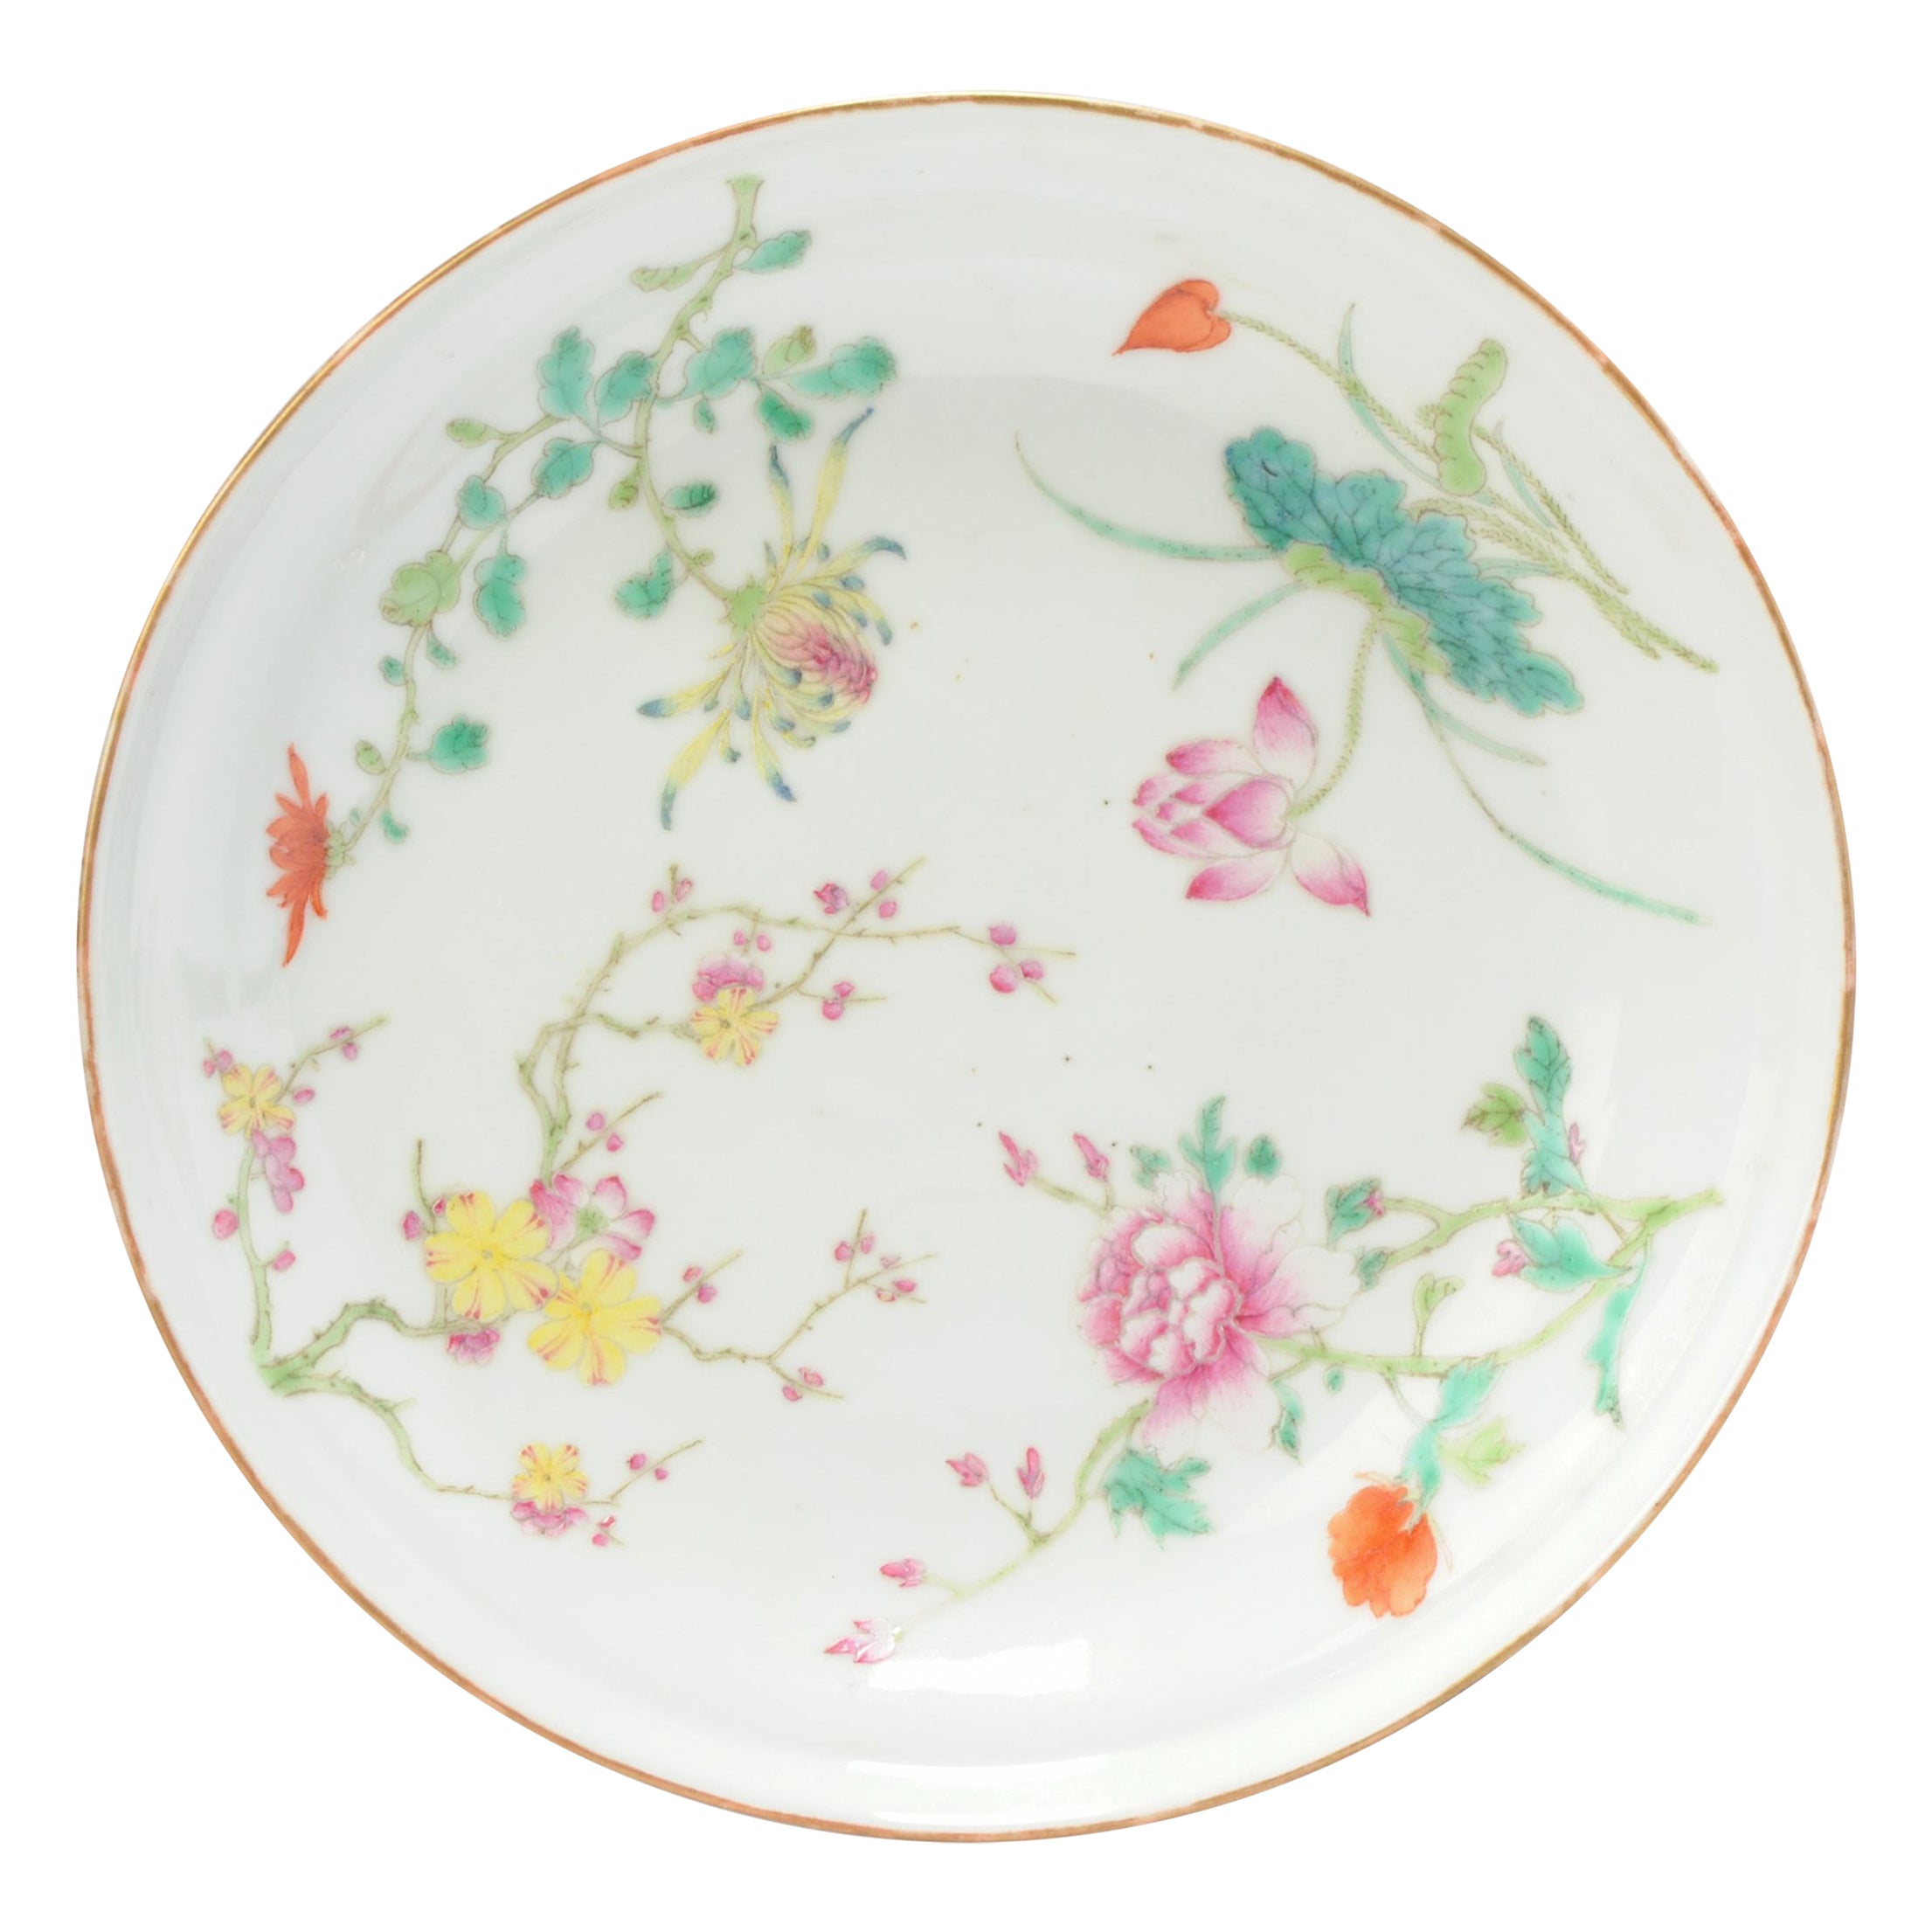 Superior Quality Guangxu or Minguo Chinese Porcelain Tazza with Flowers For Sale